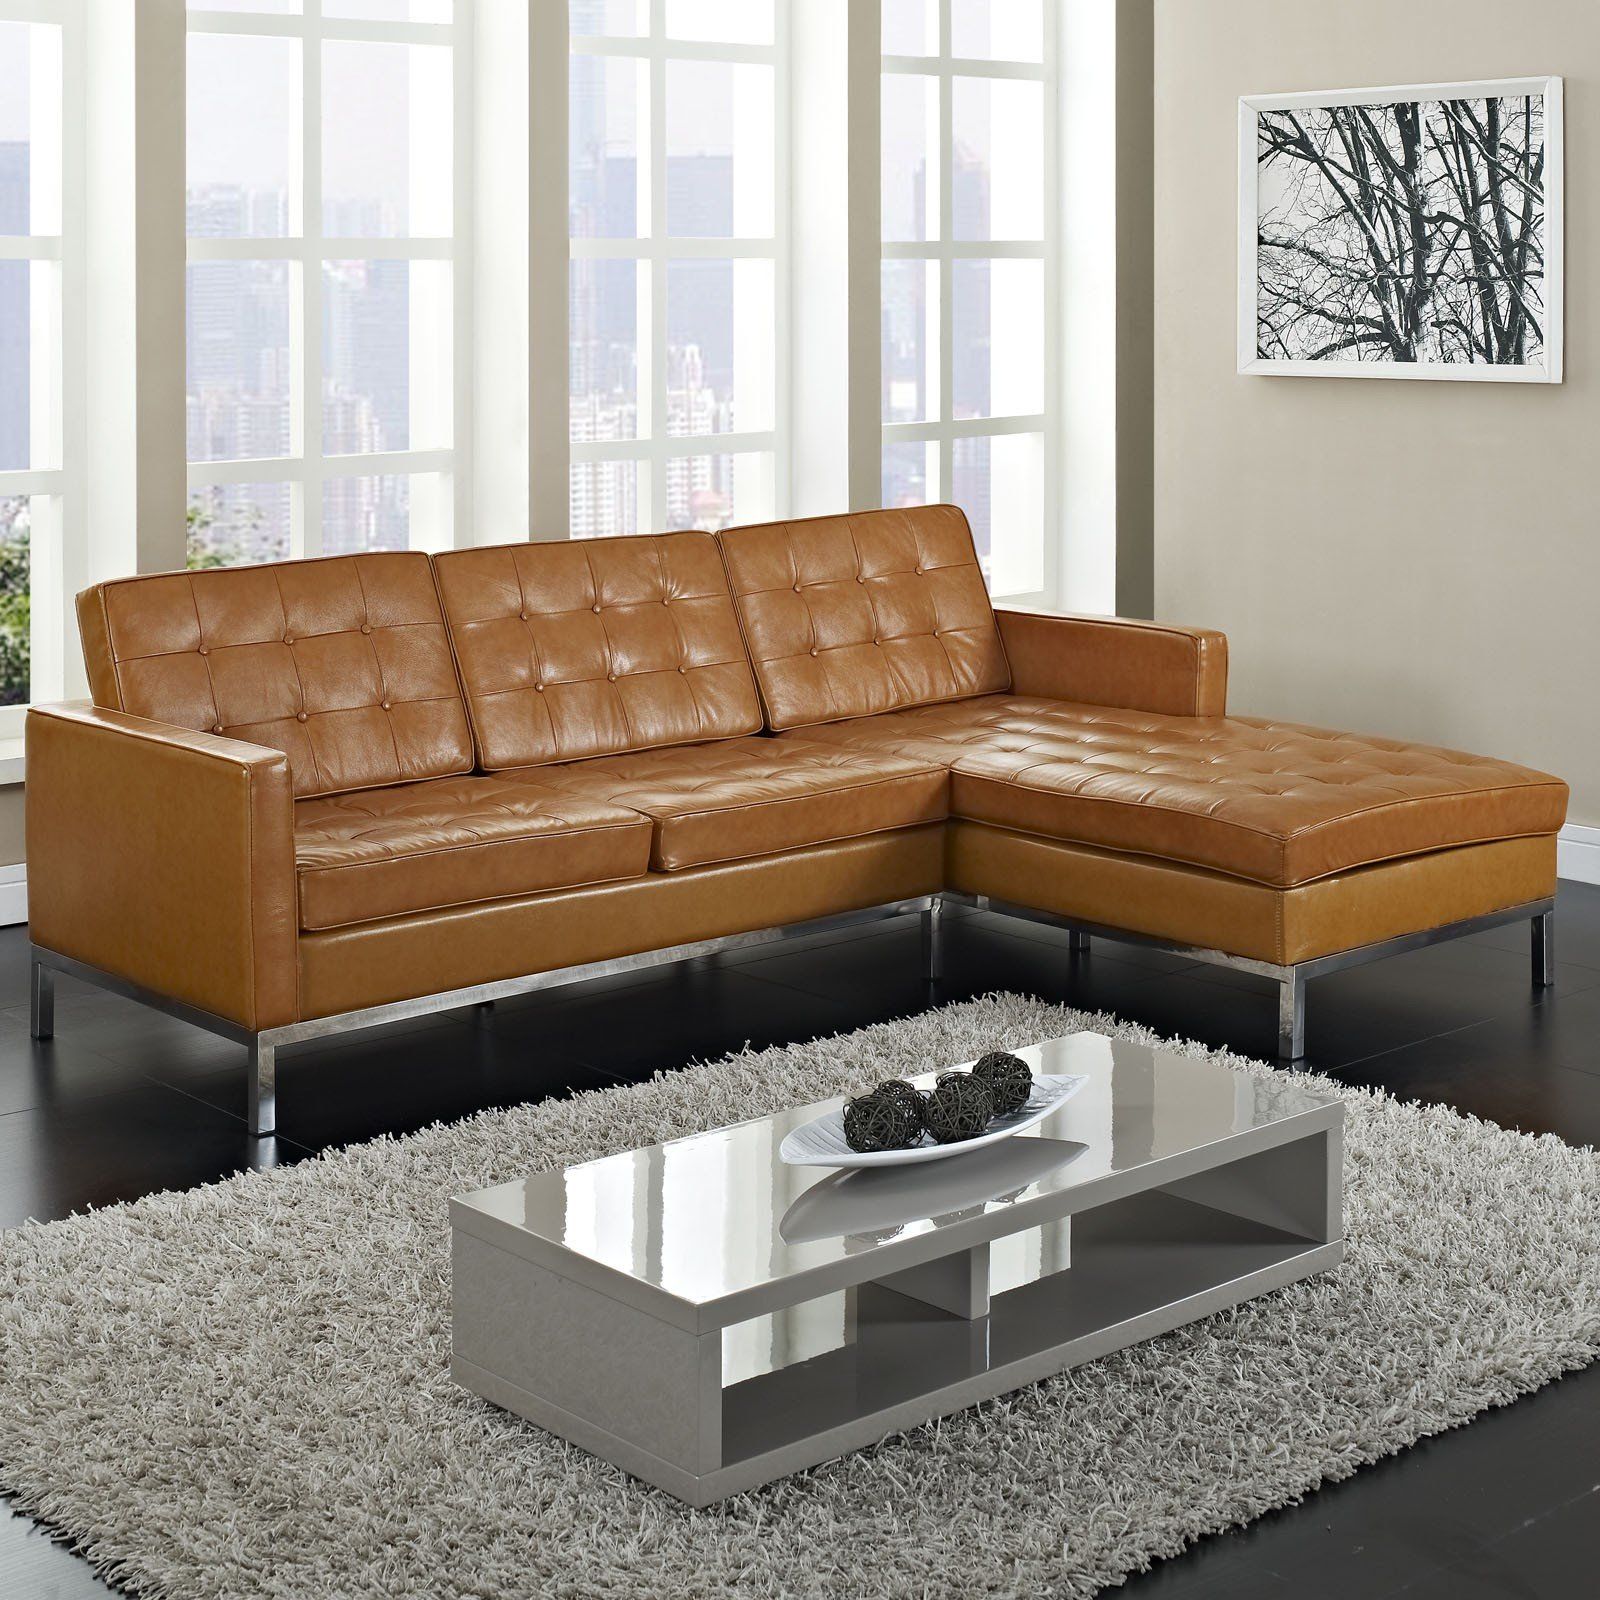 Simple Review About Living Room Furniture: Small Sectional With Regard To Easton Small Space Sectional Futon Sofas (Photo 12 of 15)